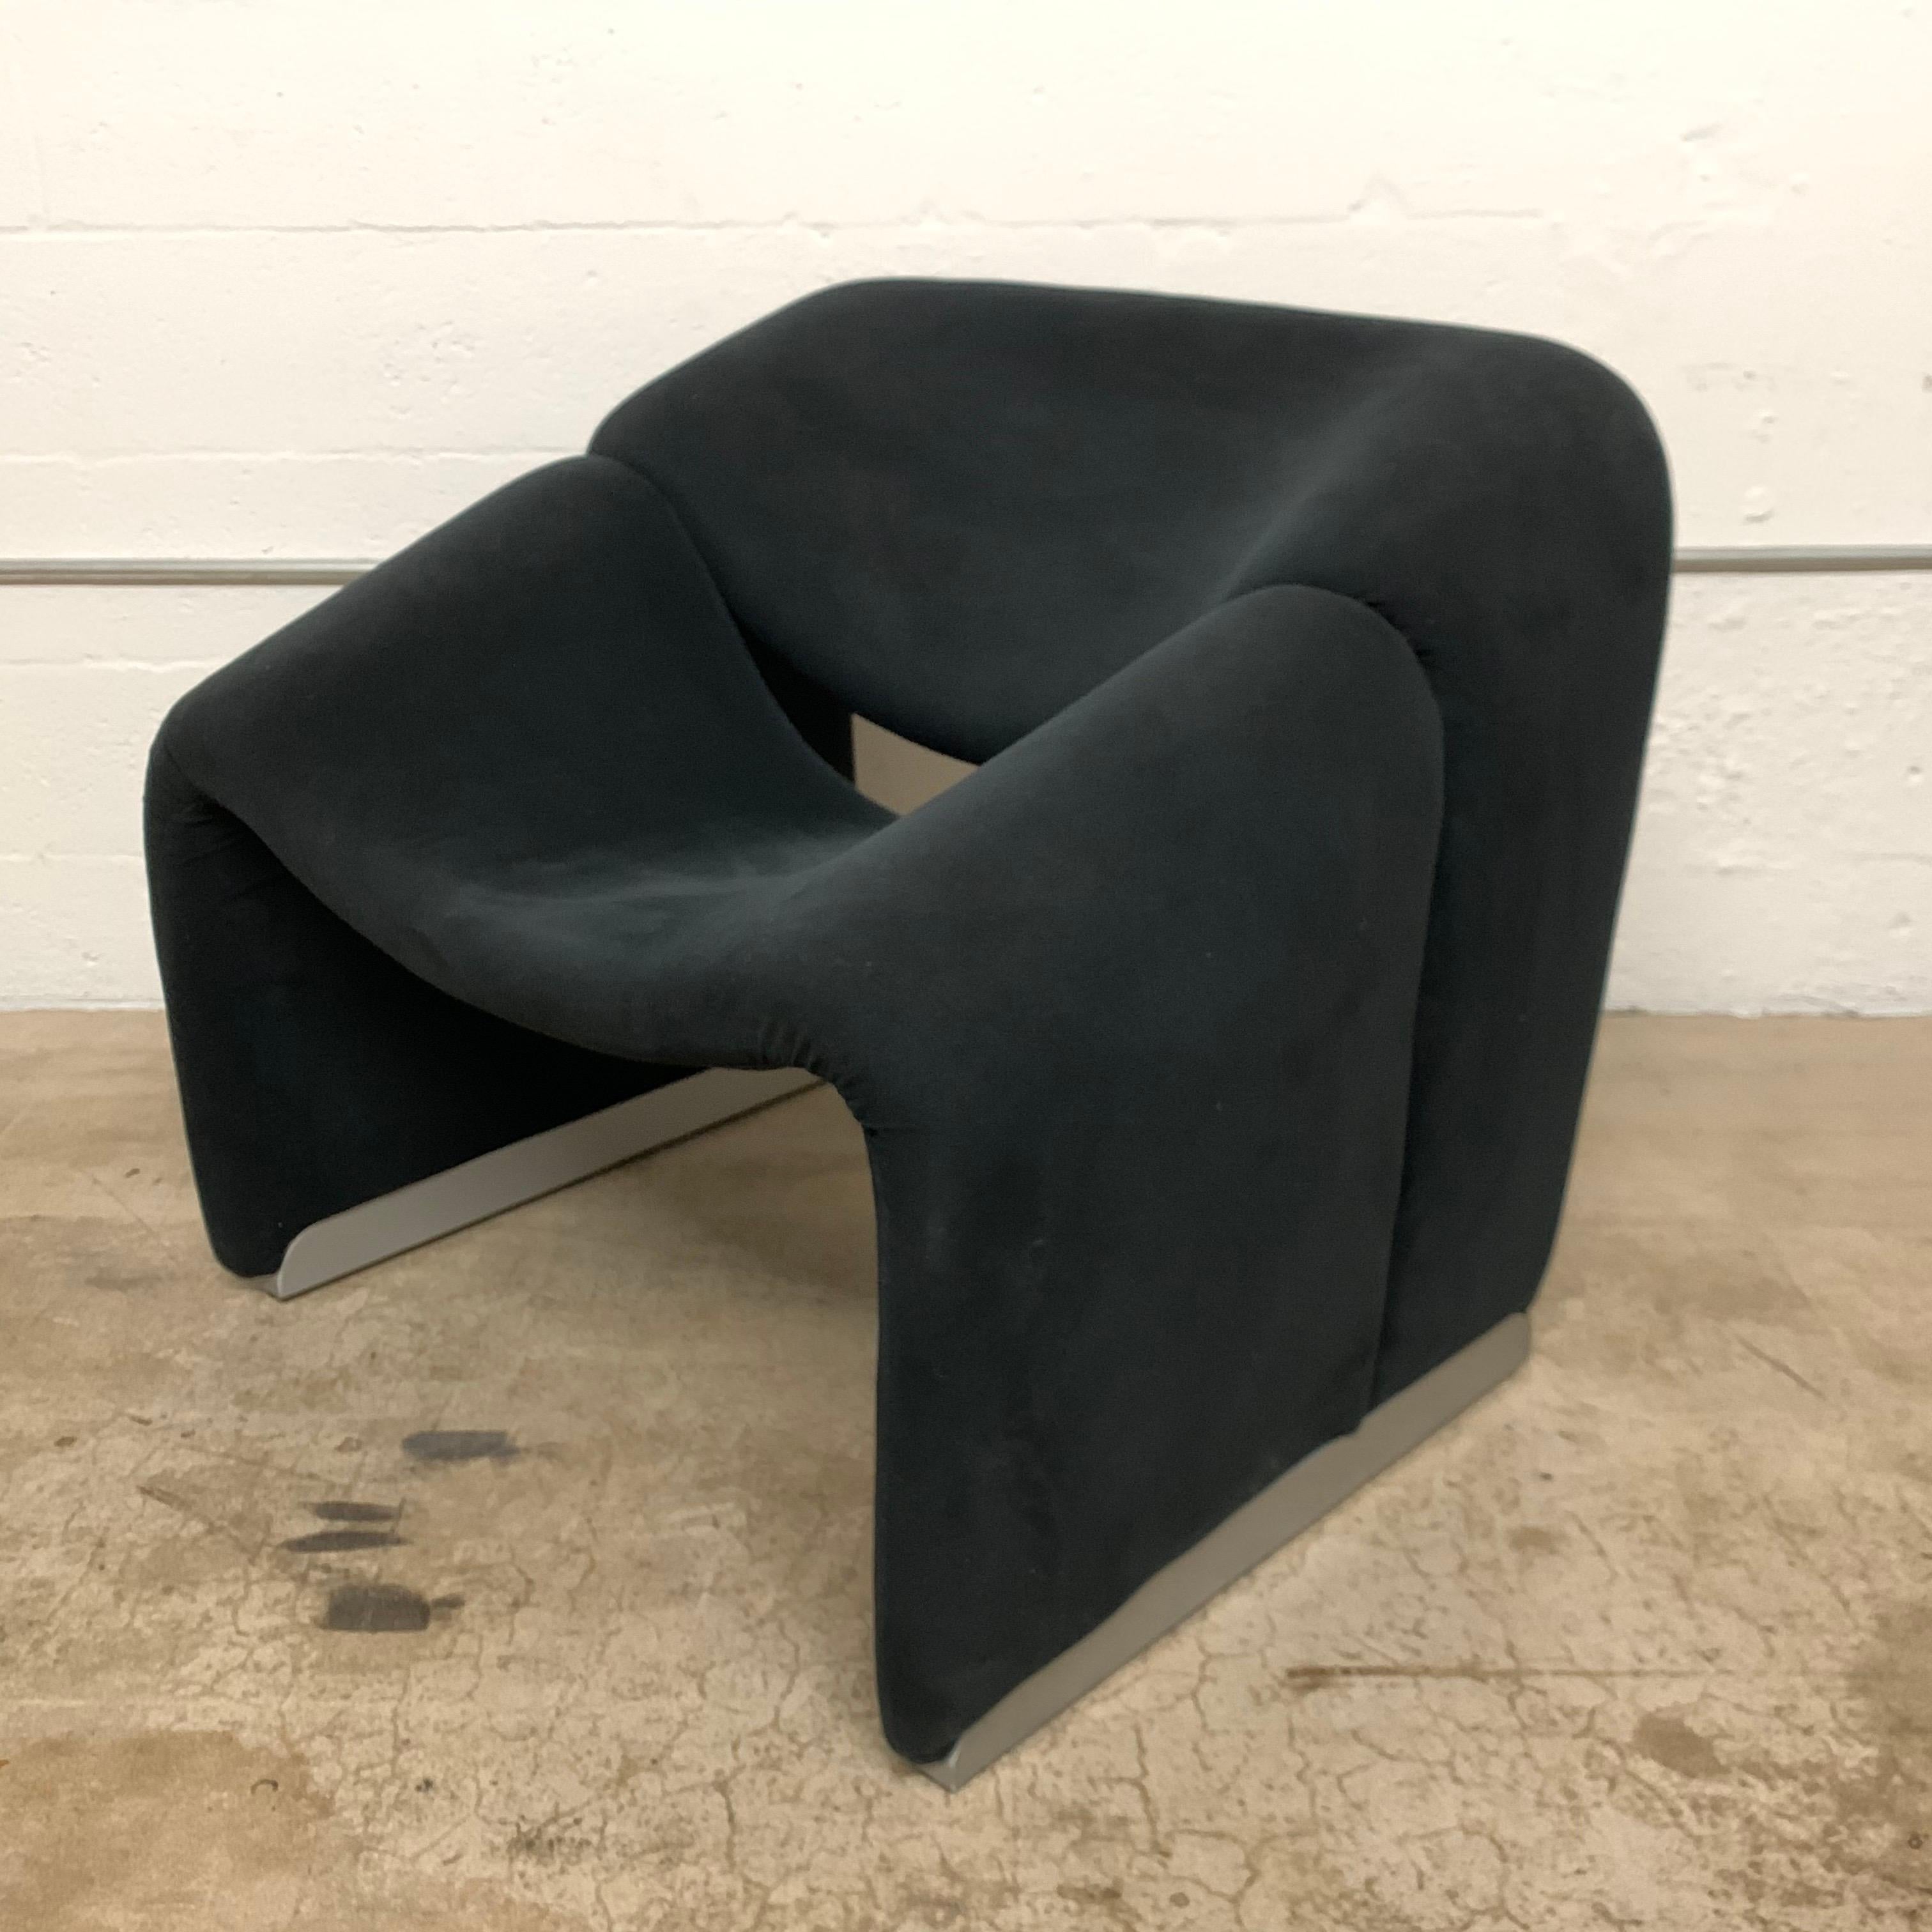 Groovy chair rendered in black ultra suede with aluminum slide bases designed by Pierre Paulin for Artifort, 1970s.